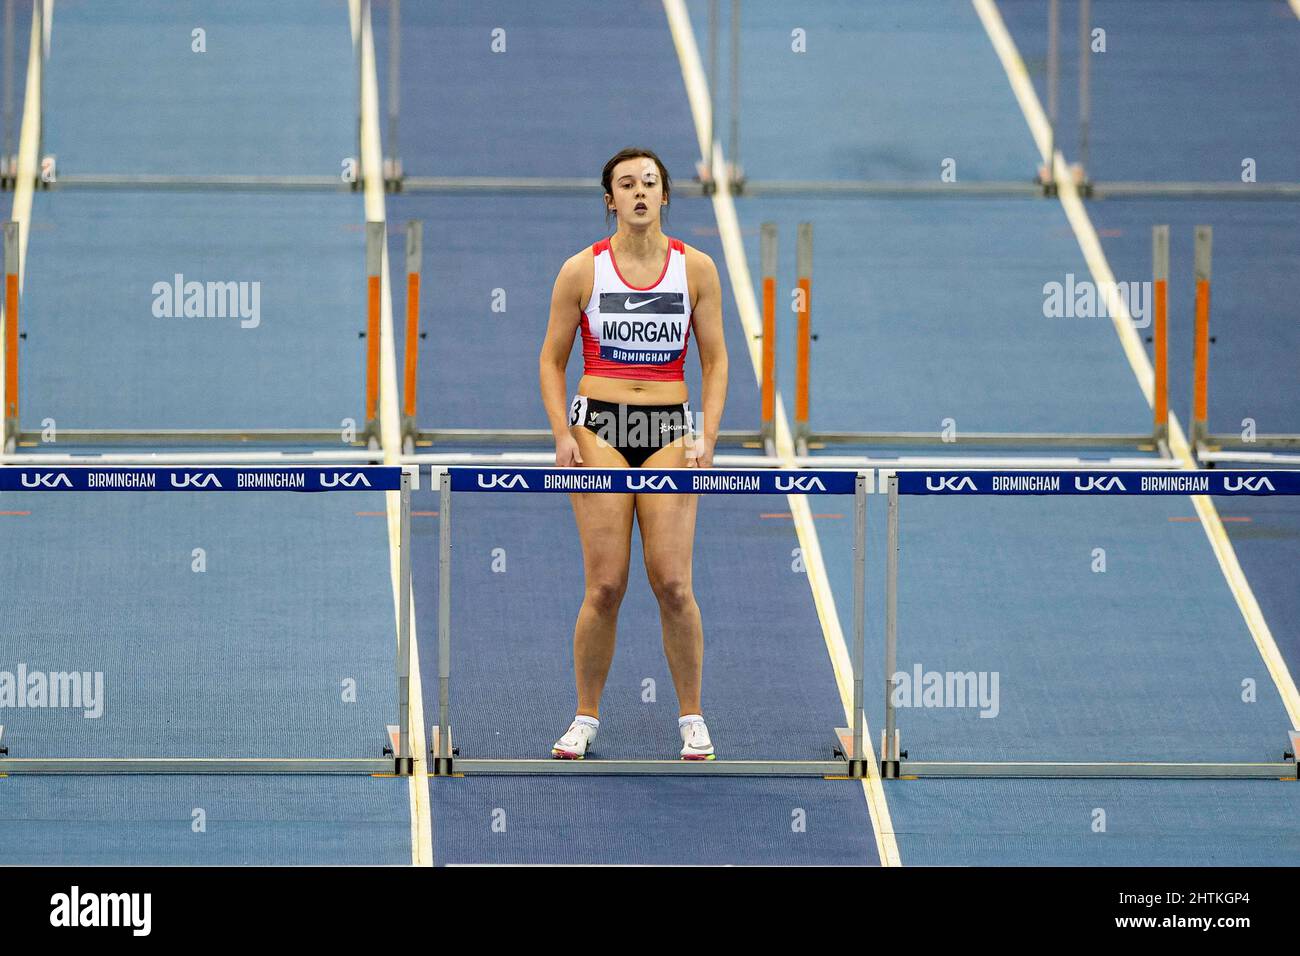 Saturday 26 February : Grace Morgan of  CARDIFF in the 60 Meters Hurdles at the  UK Athletics Indoor Championships and World Trials  Birmingham at the Stock Photo